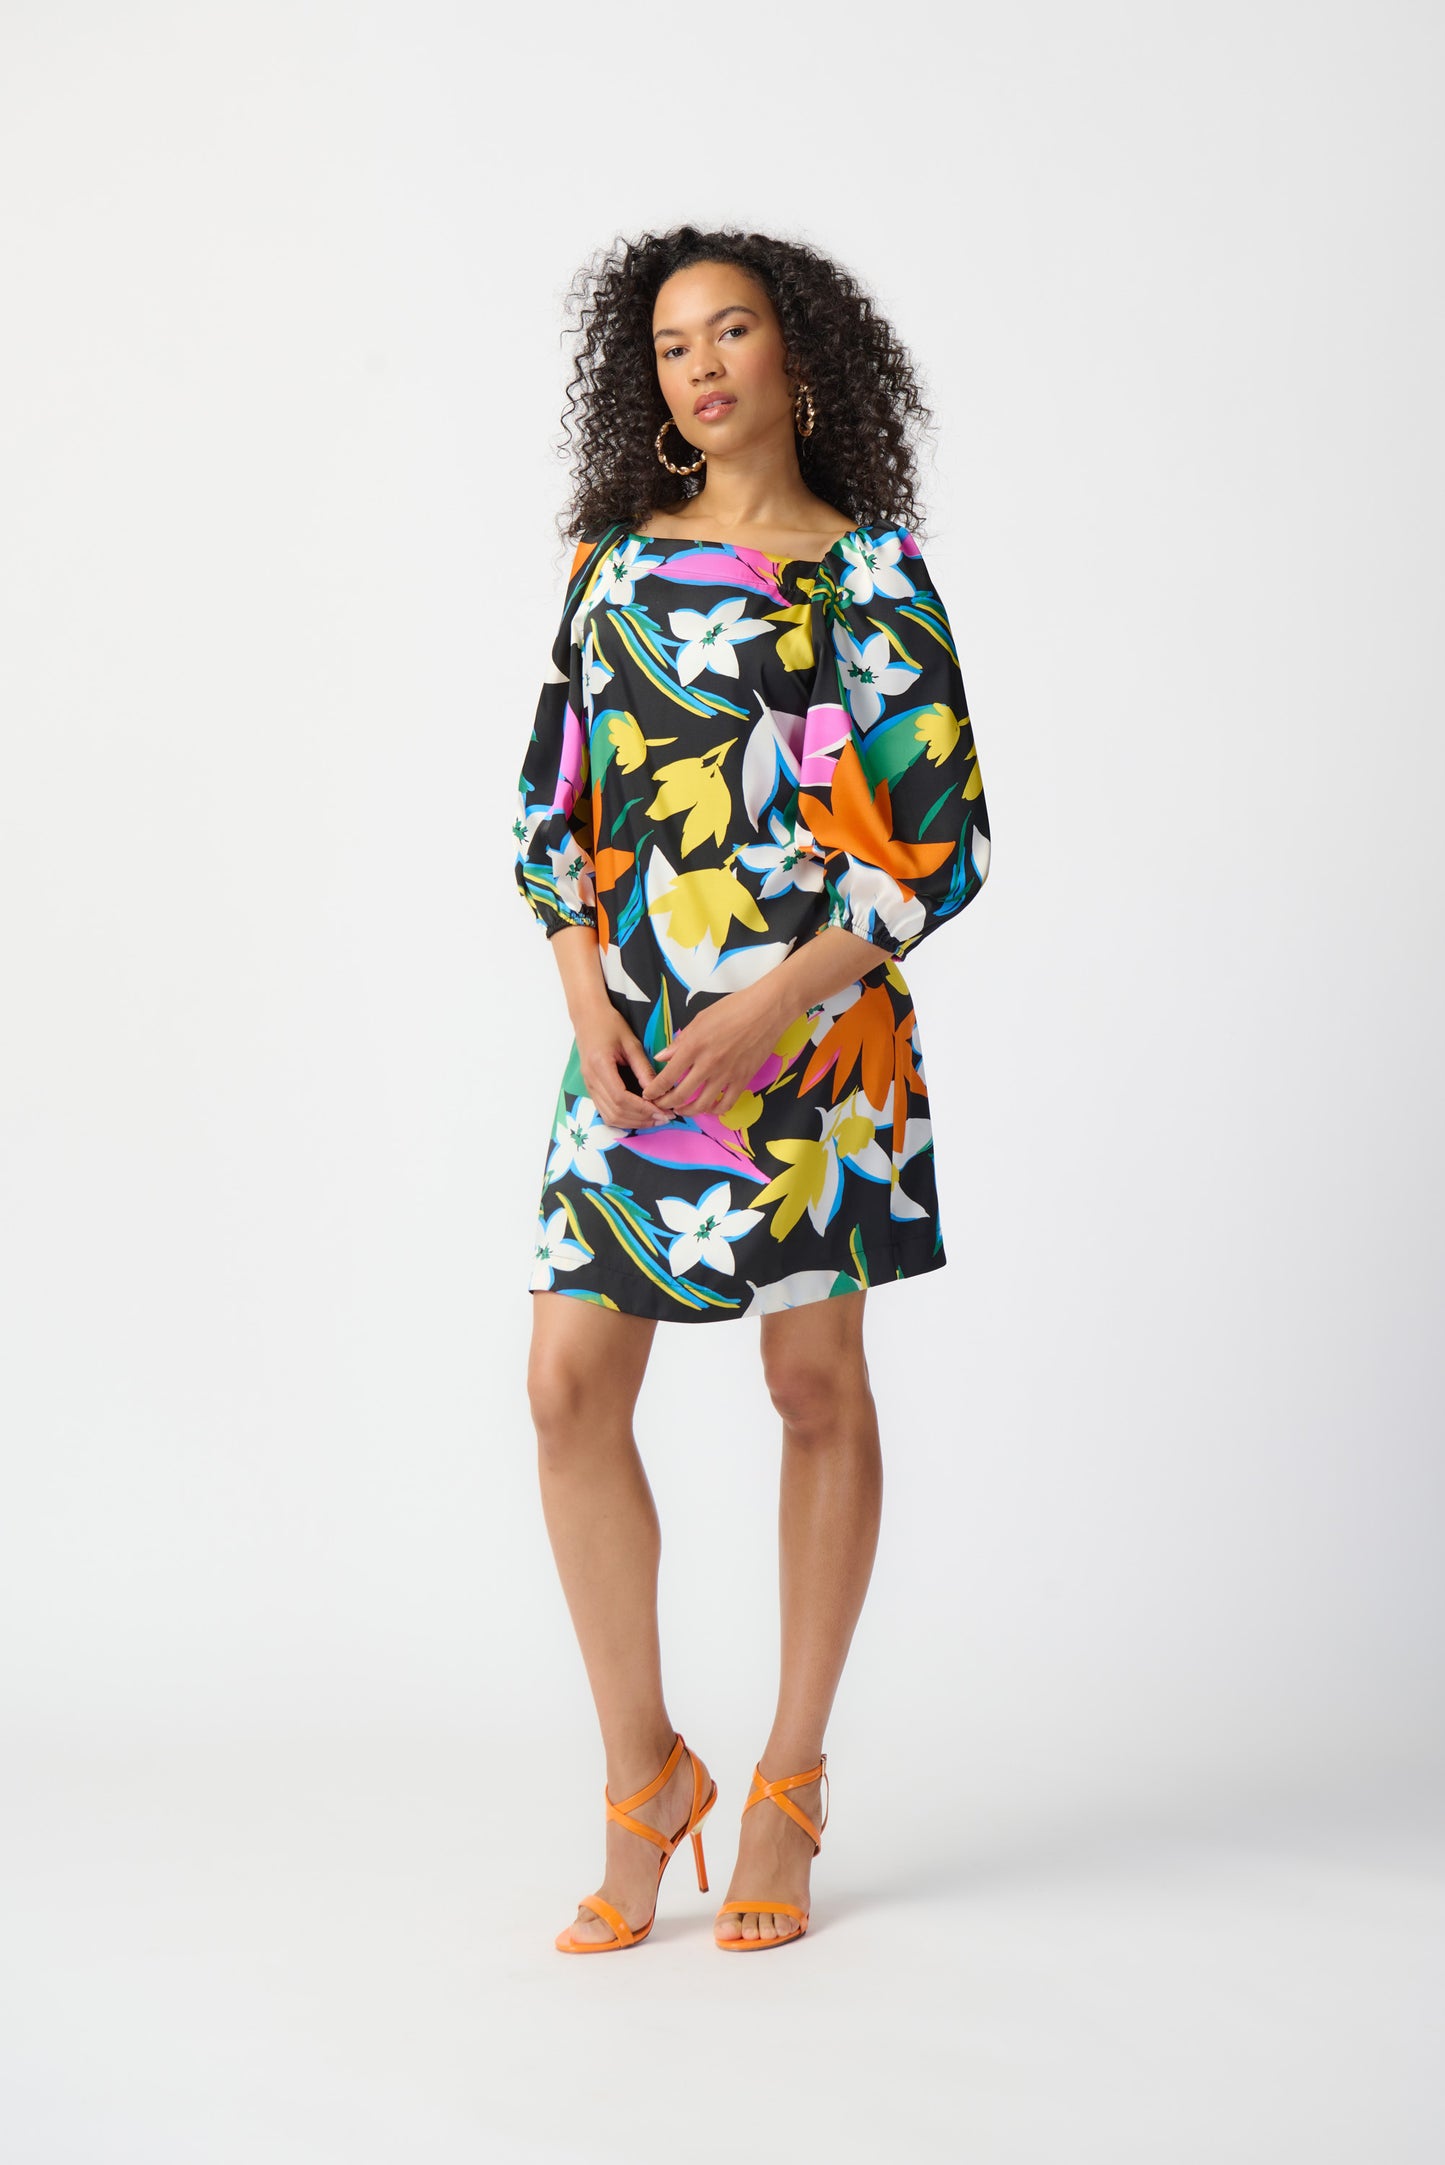 Joseph Ribkoff long-sleeved satin dress, colorful floral print. Square neckline, puff sleeves. Women's spring dress. Spring collection. Women's boutique. Mackinac Island